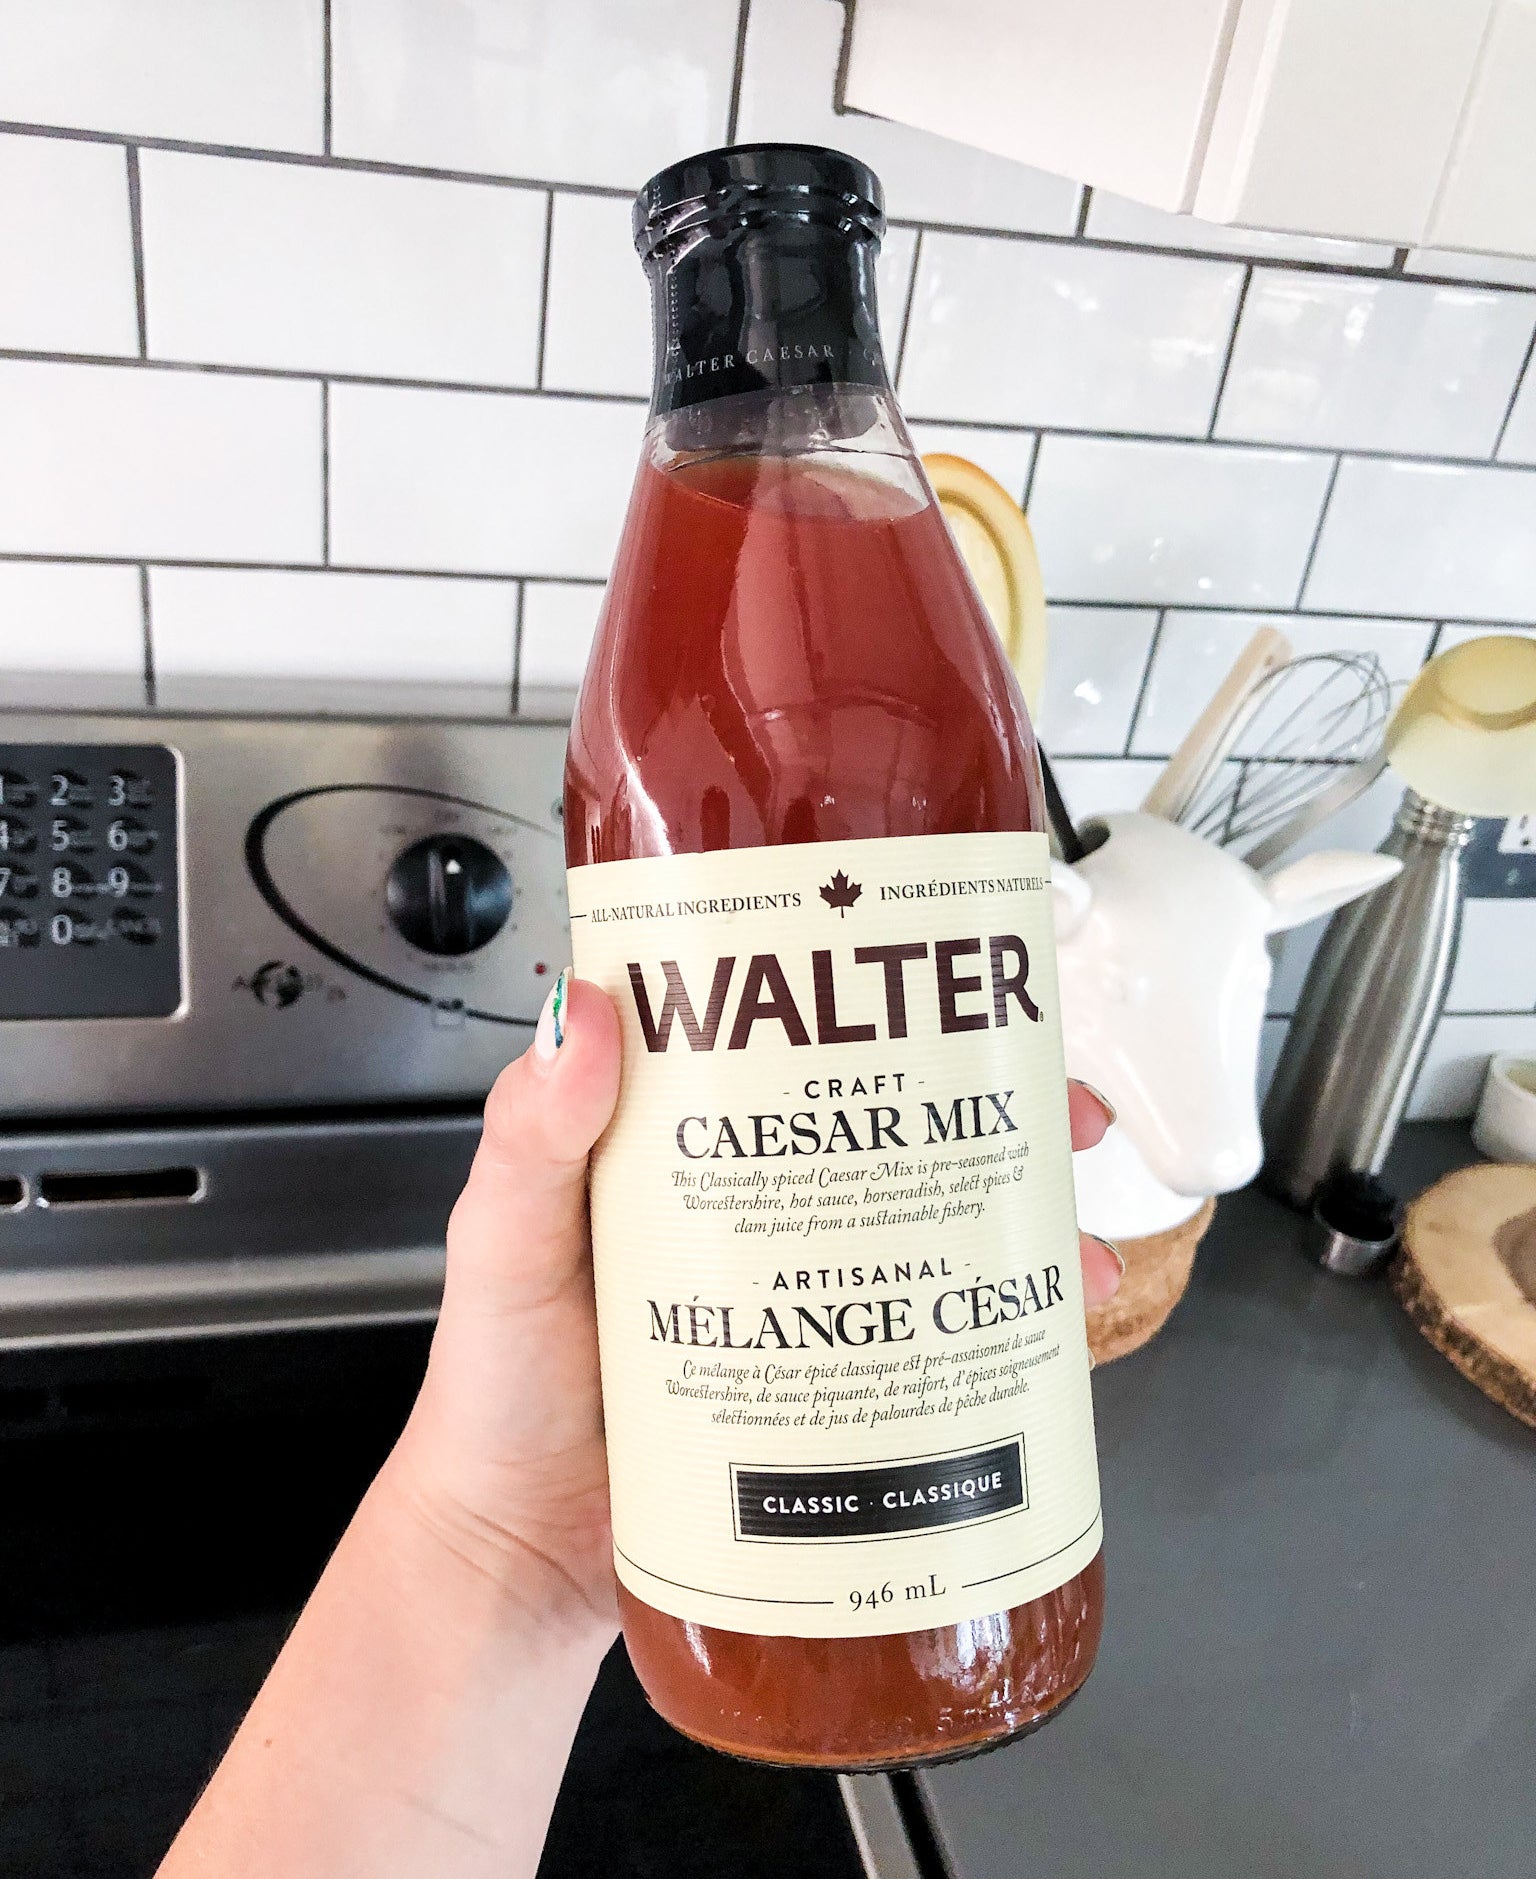 A person holding up a bottle of walter&#x27;s craft caesar mix